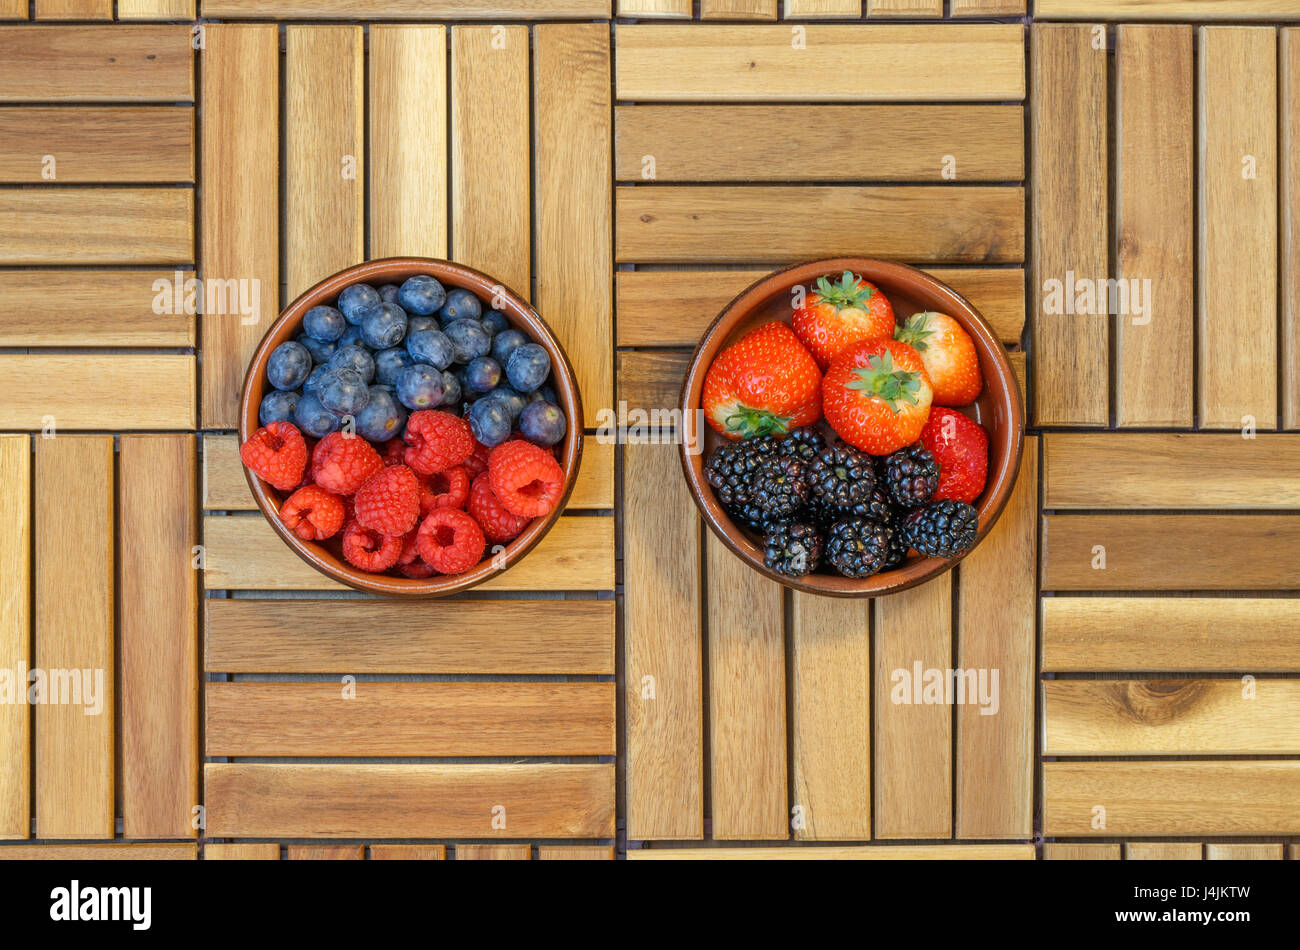 Top view of raspberries, blueberries, strawberries and blackberries in a terracotta bowl on a wooden surface Stock Photo